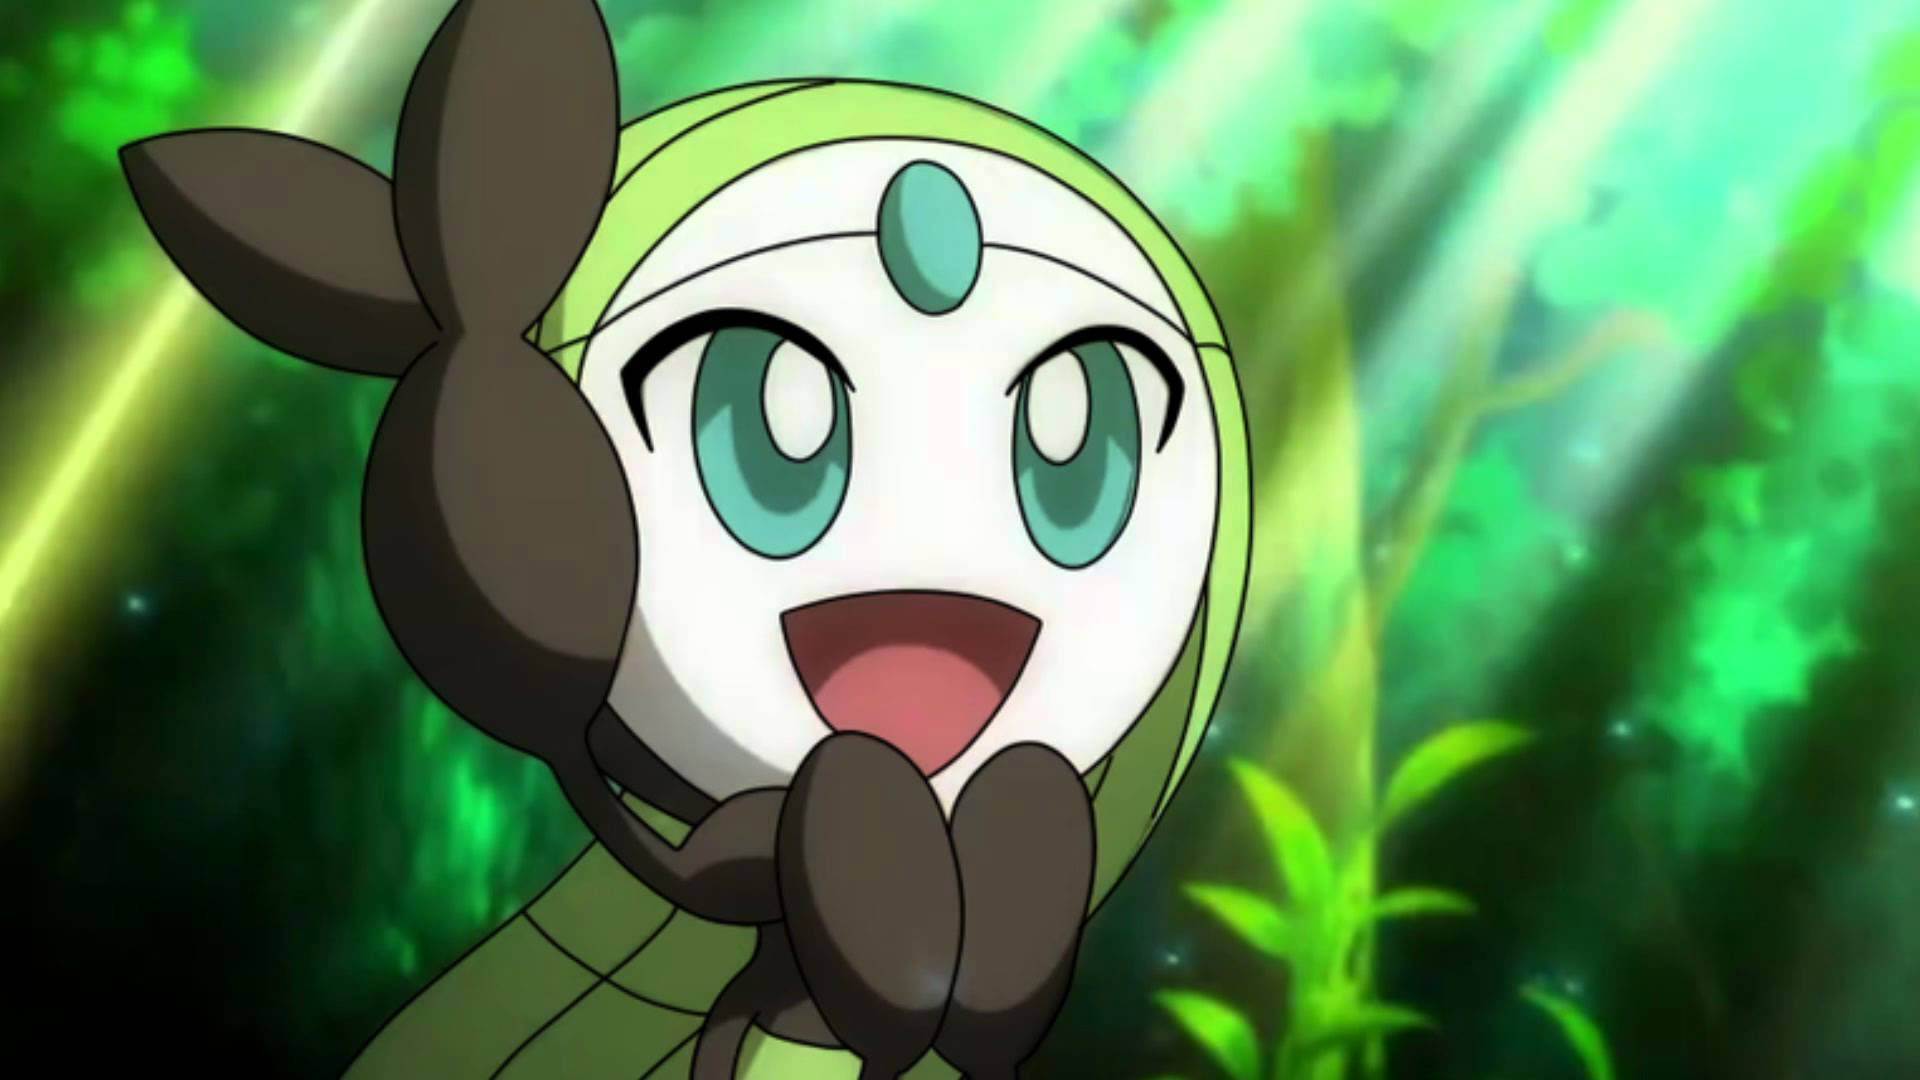 Meloetta Upgrades: A Hidden Ability that say Nope and a move